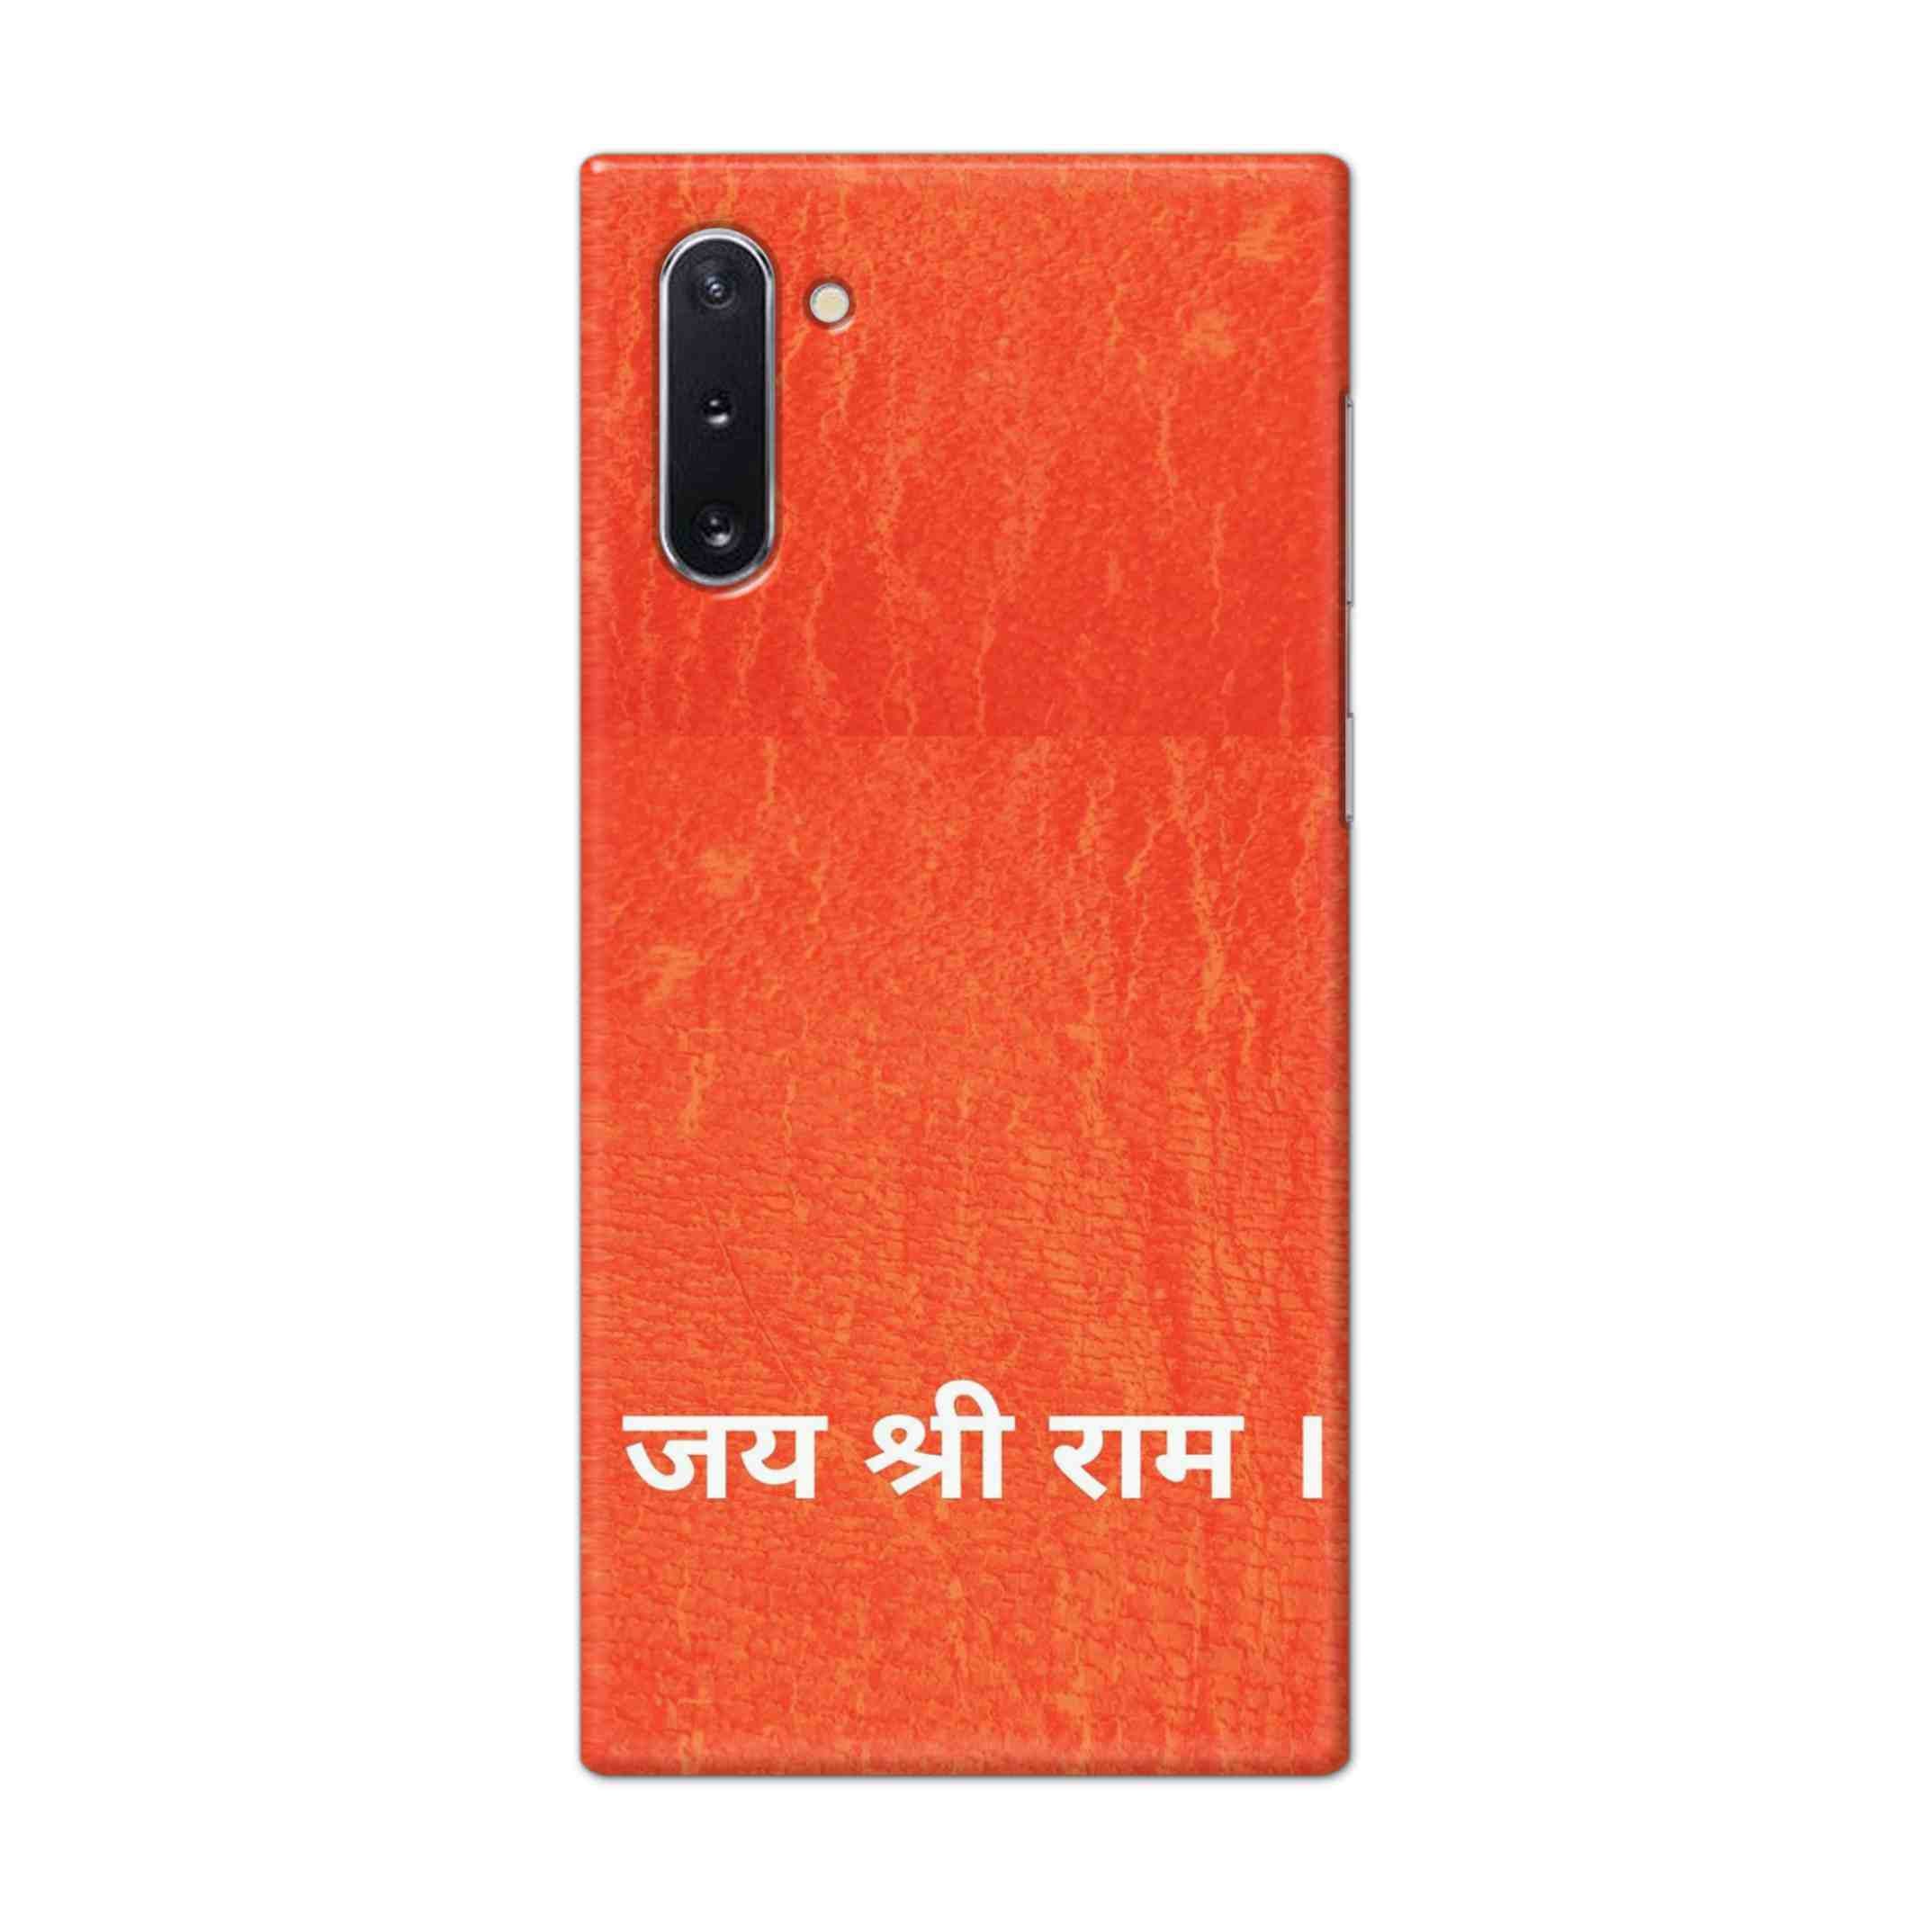 Buy Jai Shree Ram Hard Back Mobile Phone Case Cover For Samsung Galaxy Note 10 Online